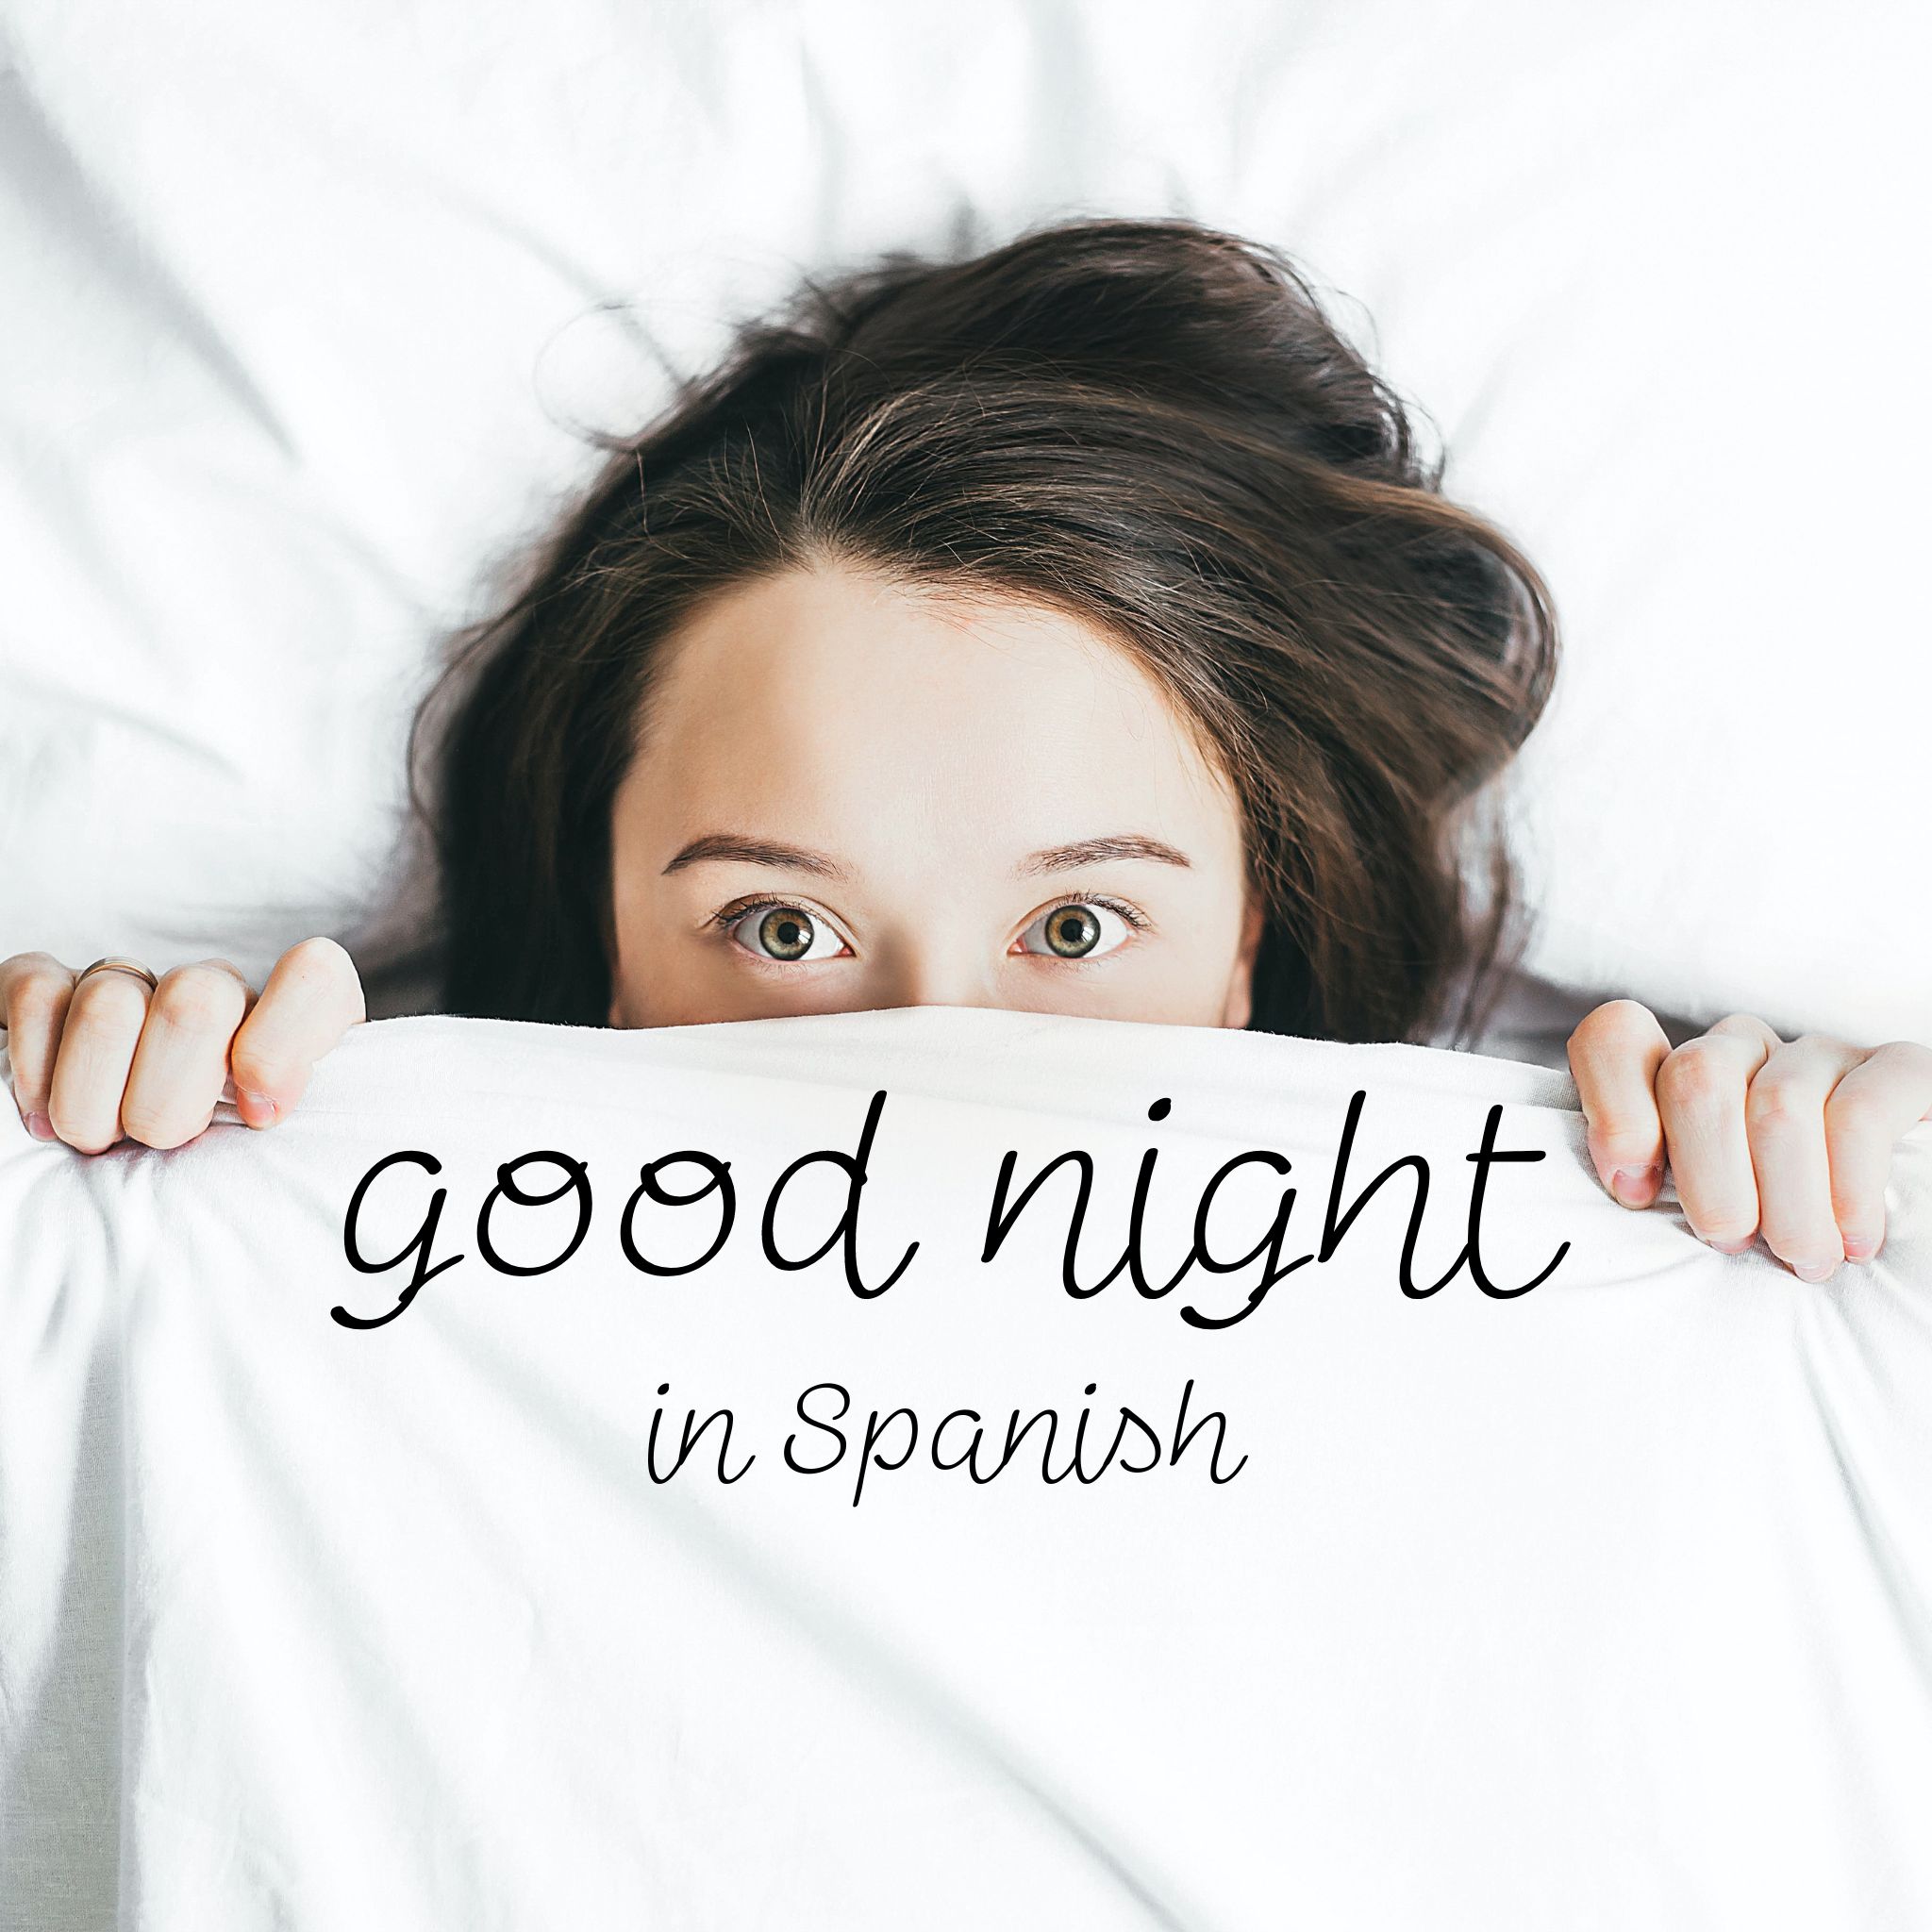 How To Say Good Night In Spanish Expressions Before Going To Bed